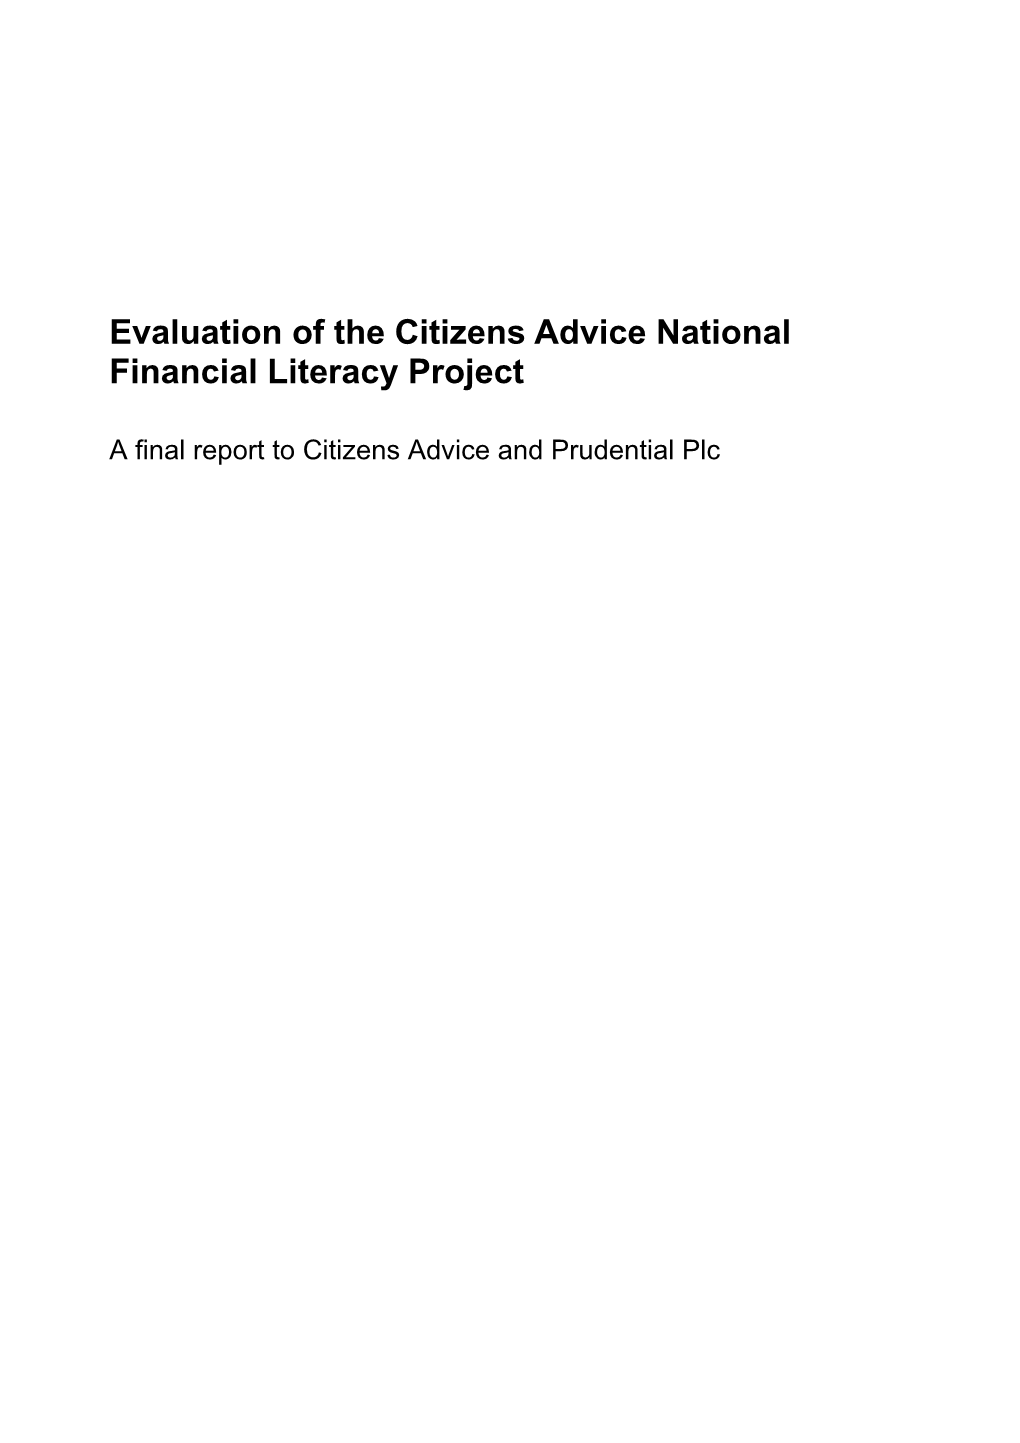 Evaluation of the Citizens Advice National Financial Literacy Project